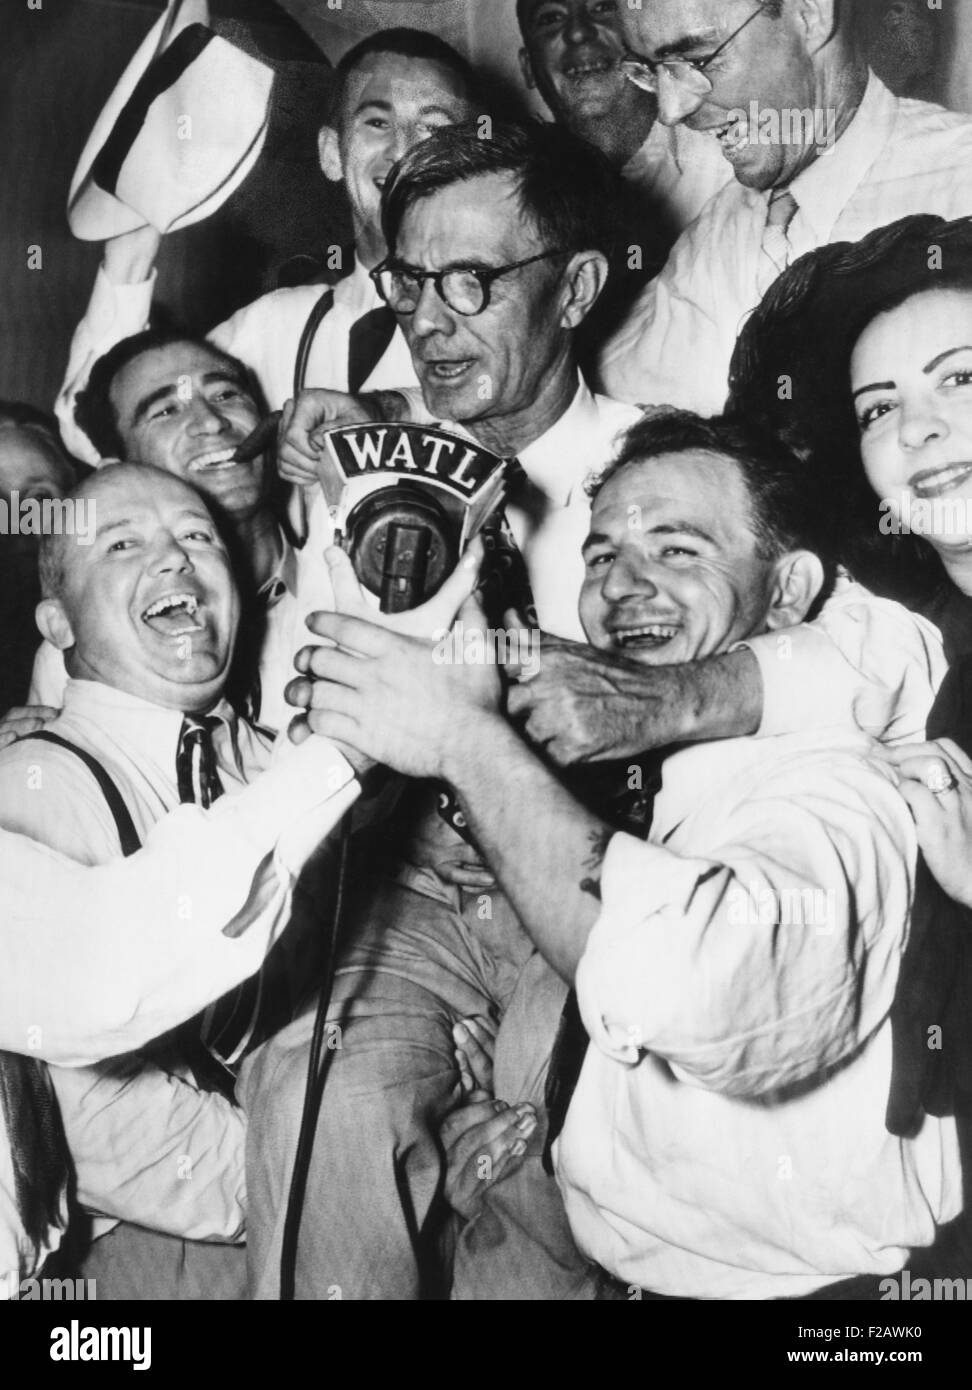 Eugene Talmadge, celebrating his victory in the democratic primary in Georgia. July 17, 1946. He promised to keep Blacks in their place in Jim Crow Georgia and was elected Governor in the Fall elections. But he died of natural causes on died on Dec. 21, 1946 before he started his 4th term as Georgia governor. By court ruling, the Lt. Gov. elect, Melvin E. Thompson was named governor. (CSU 2015 11 1339) Stock Photo